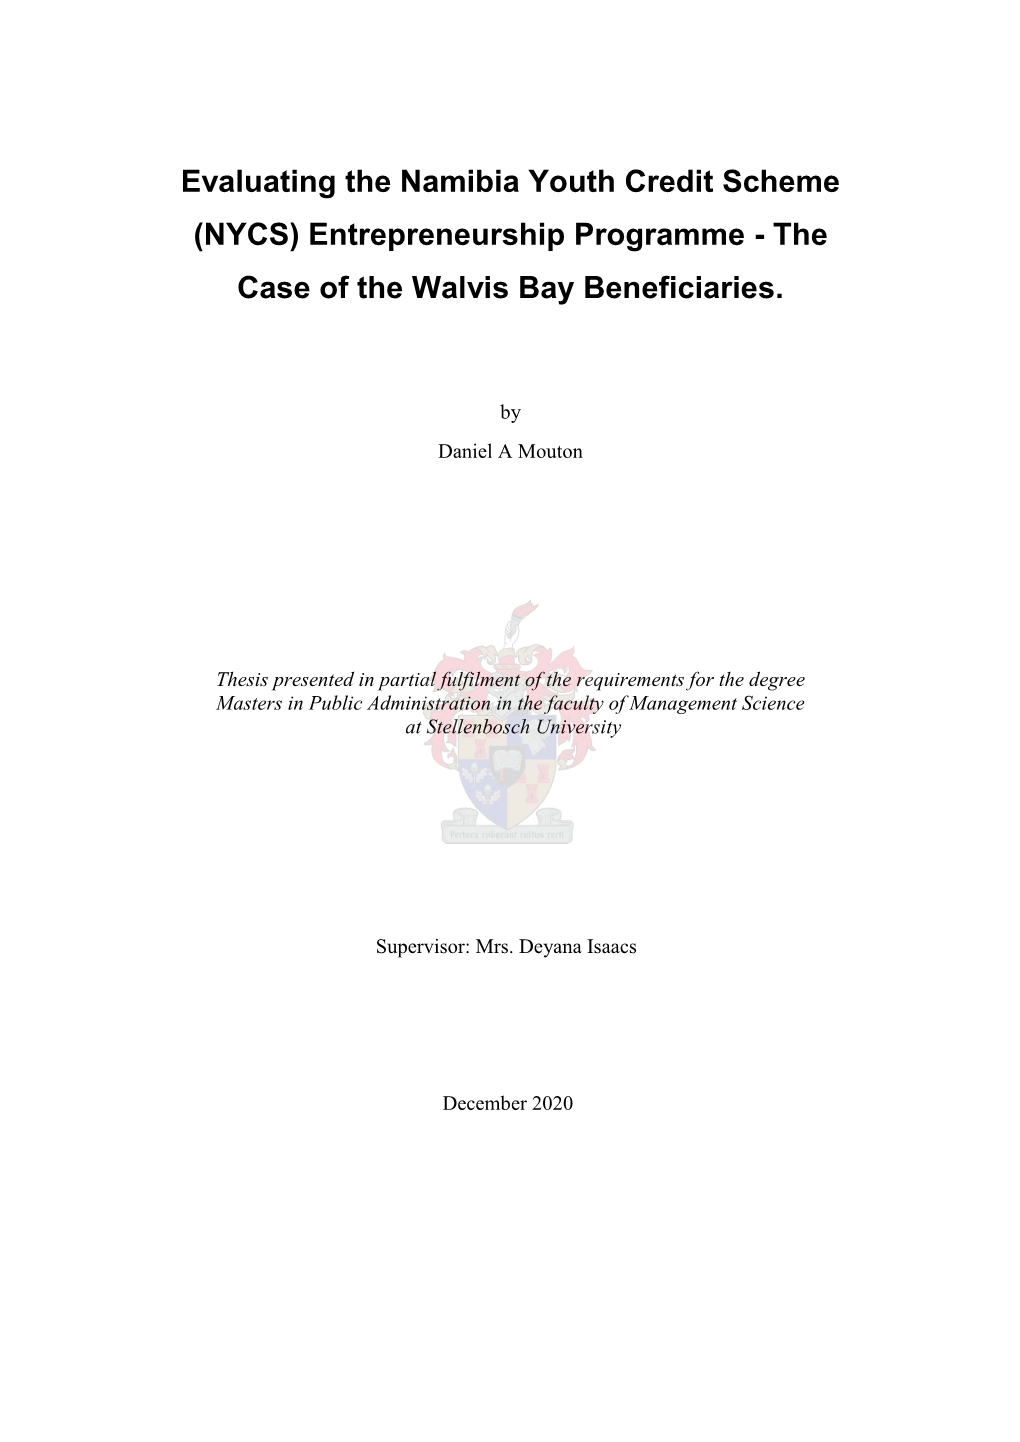 Evaluating the Namibia Youth Credit Scheme (NYCS) Entrepreneurship Programme - the Case of the Walvis Bay Beneficiaries